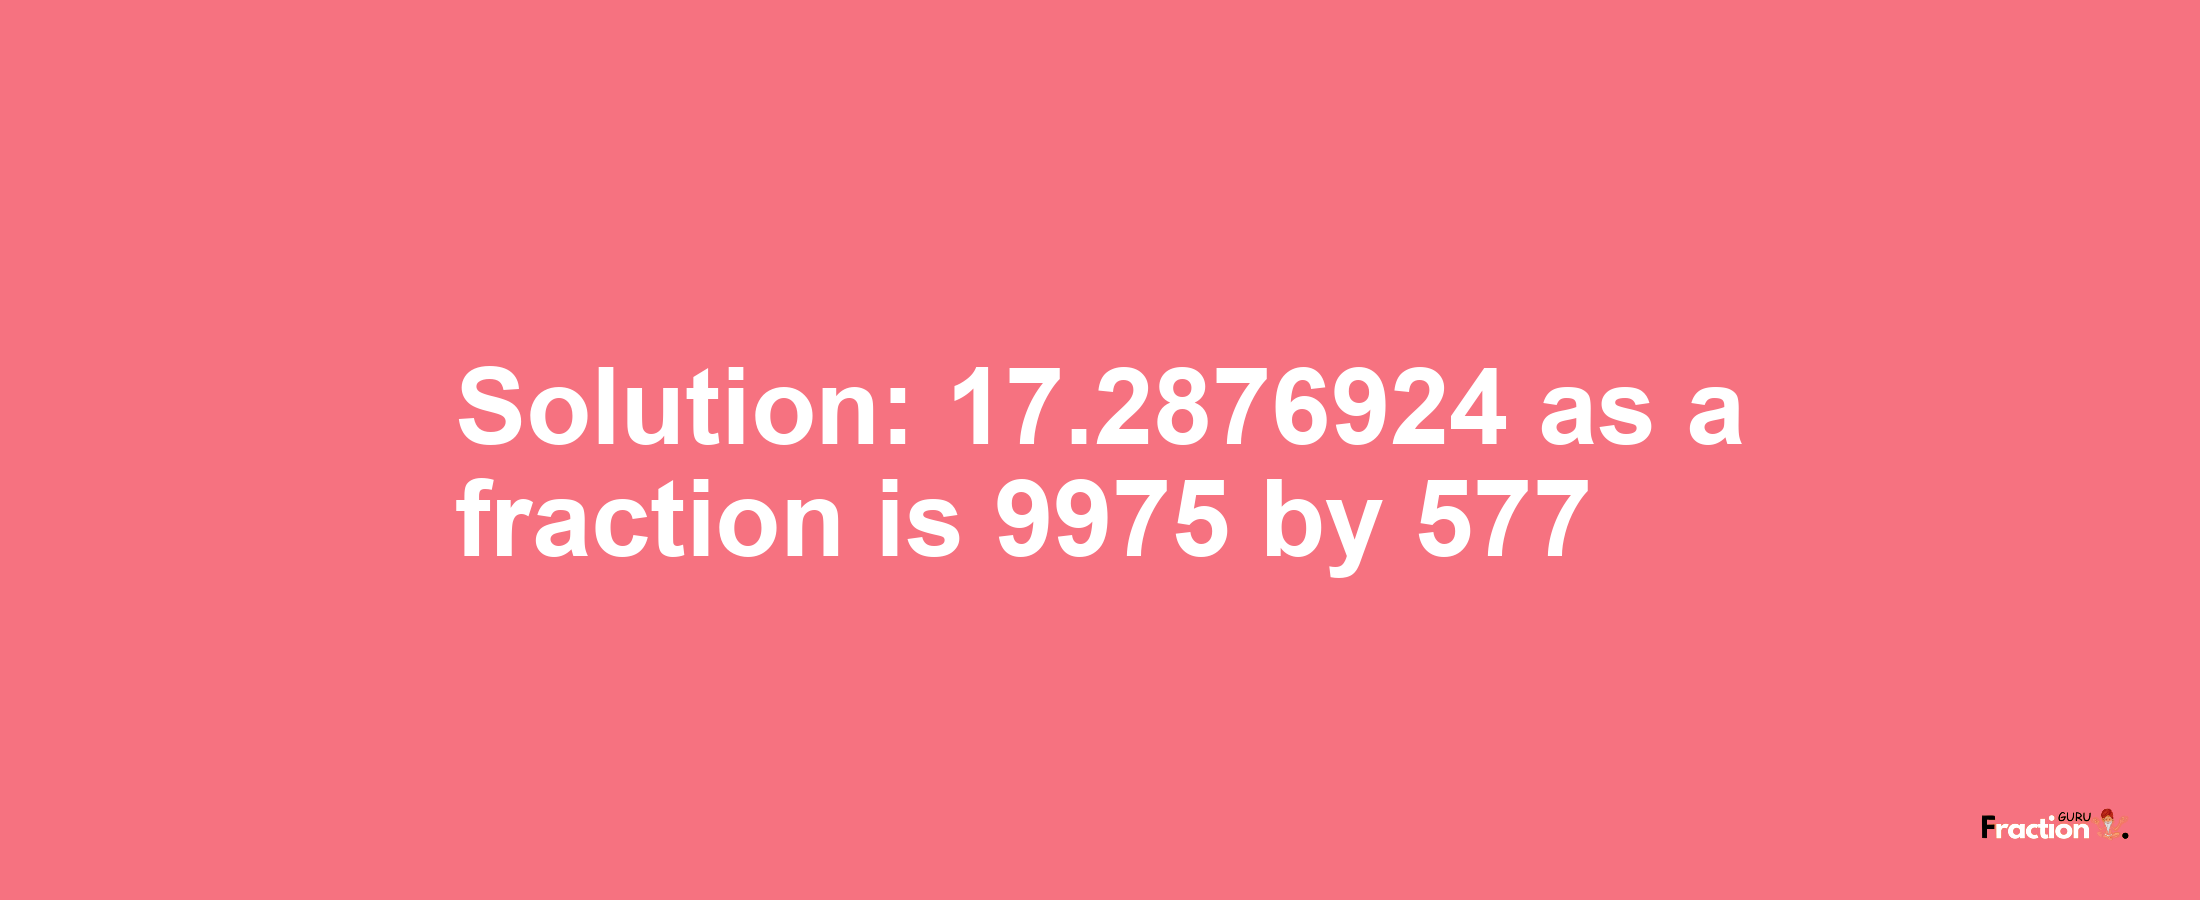 Solution:17.2876924 as a fraction is 9975/577